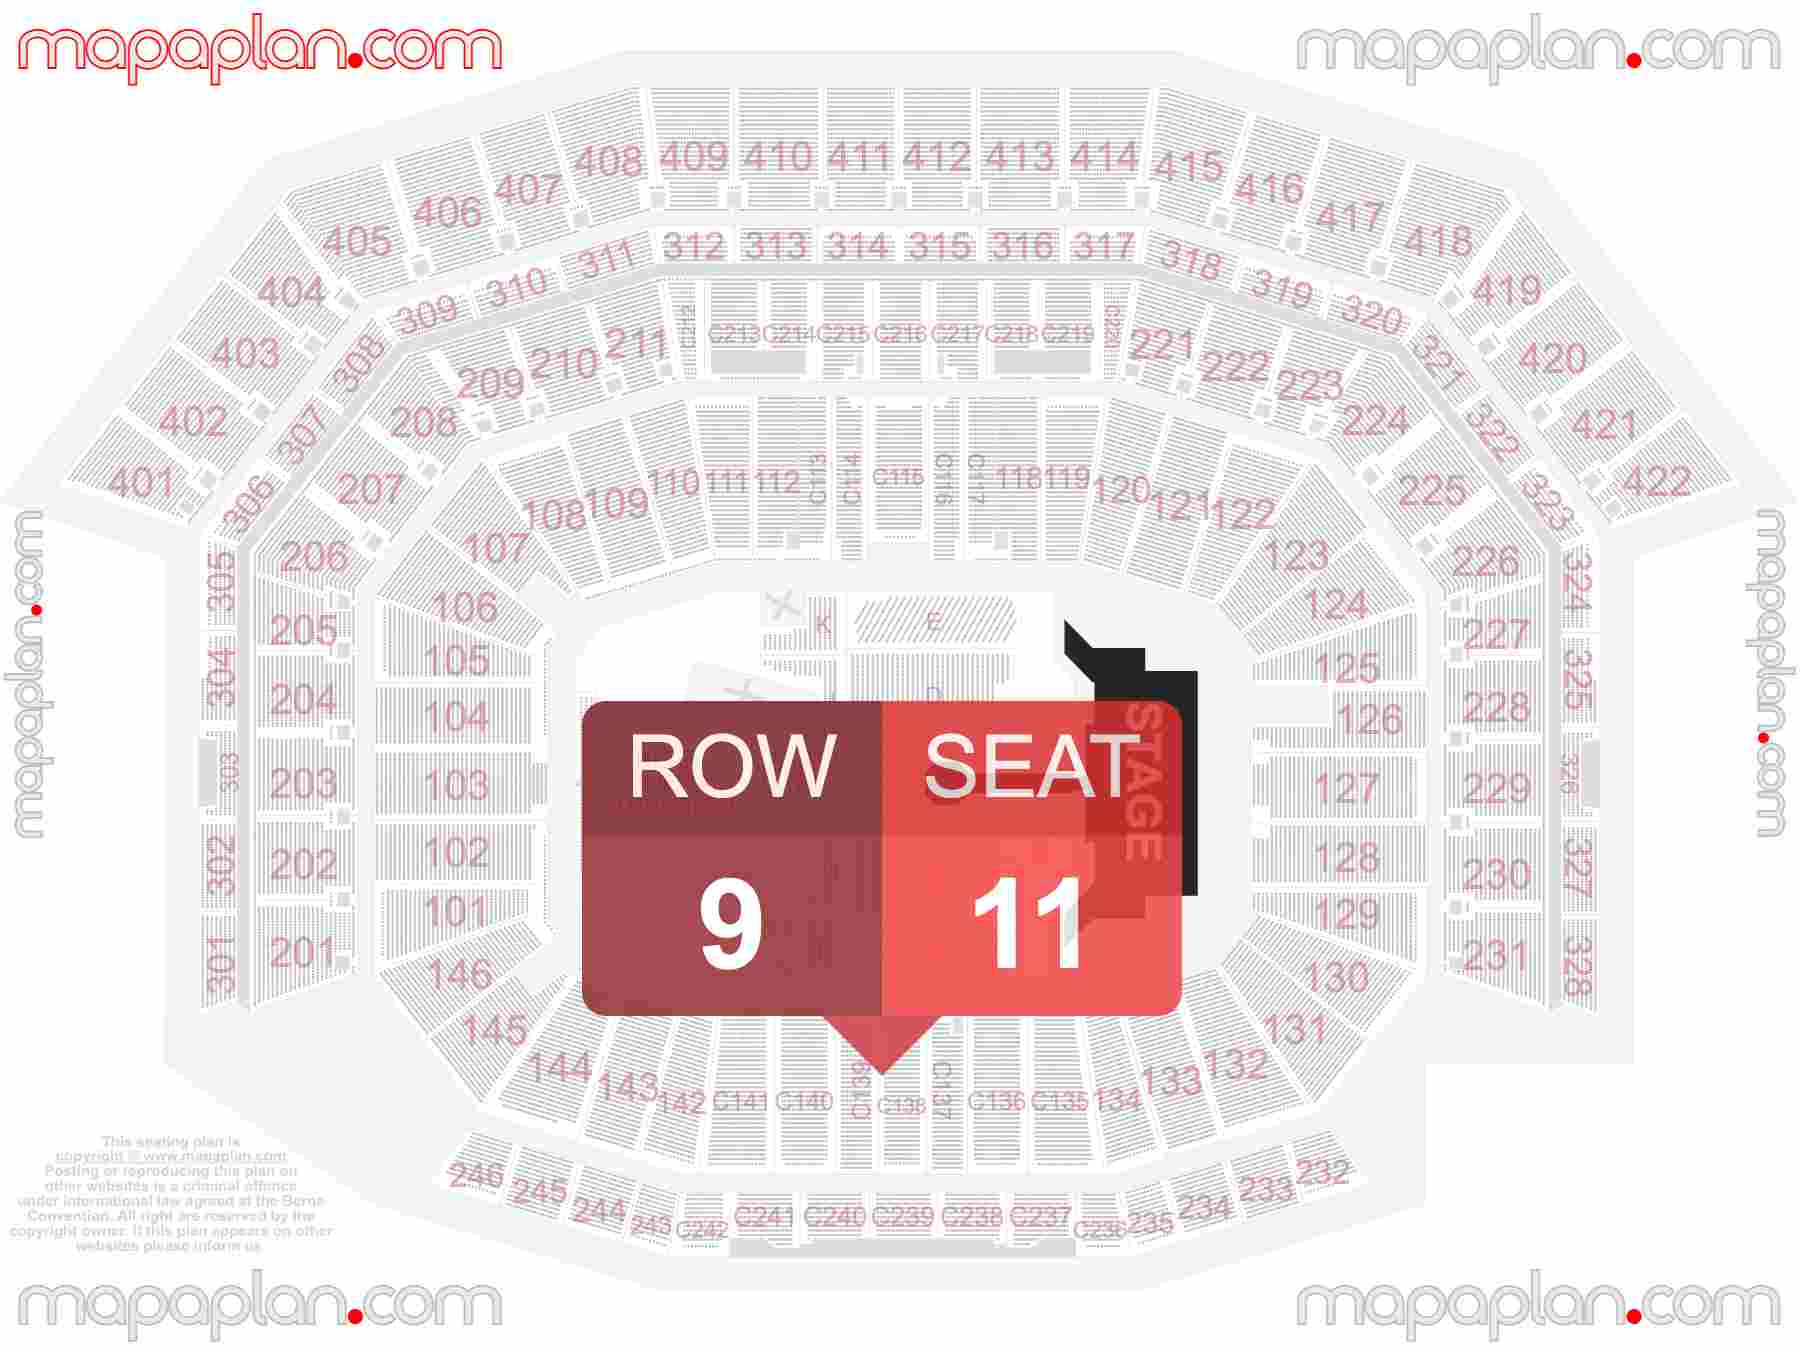 Santa Clara Levi's Stadium seating chart Concert detailed seat numbers and row numbering chart with interactive map plan layout